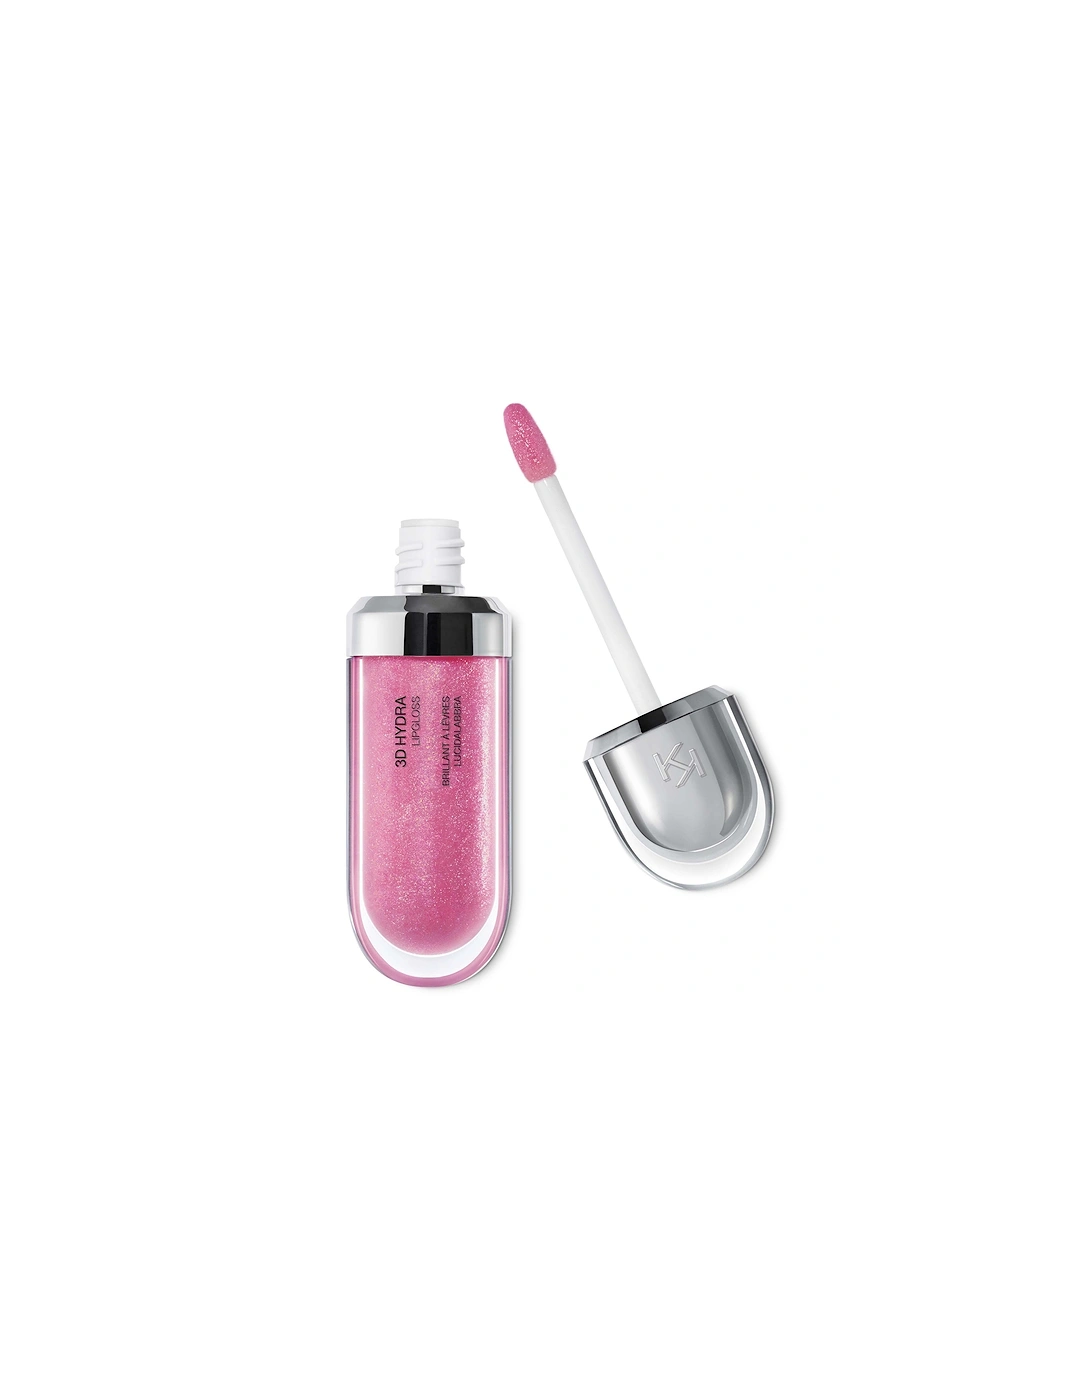 3D Hydra Lipgloss 6.5ml - 26 Sparkling Hibiscus Pink, 2 of 1